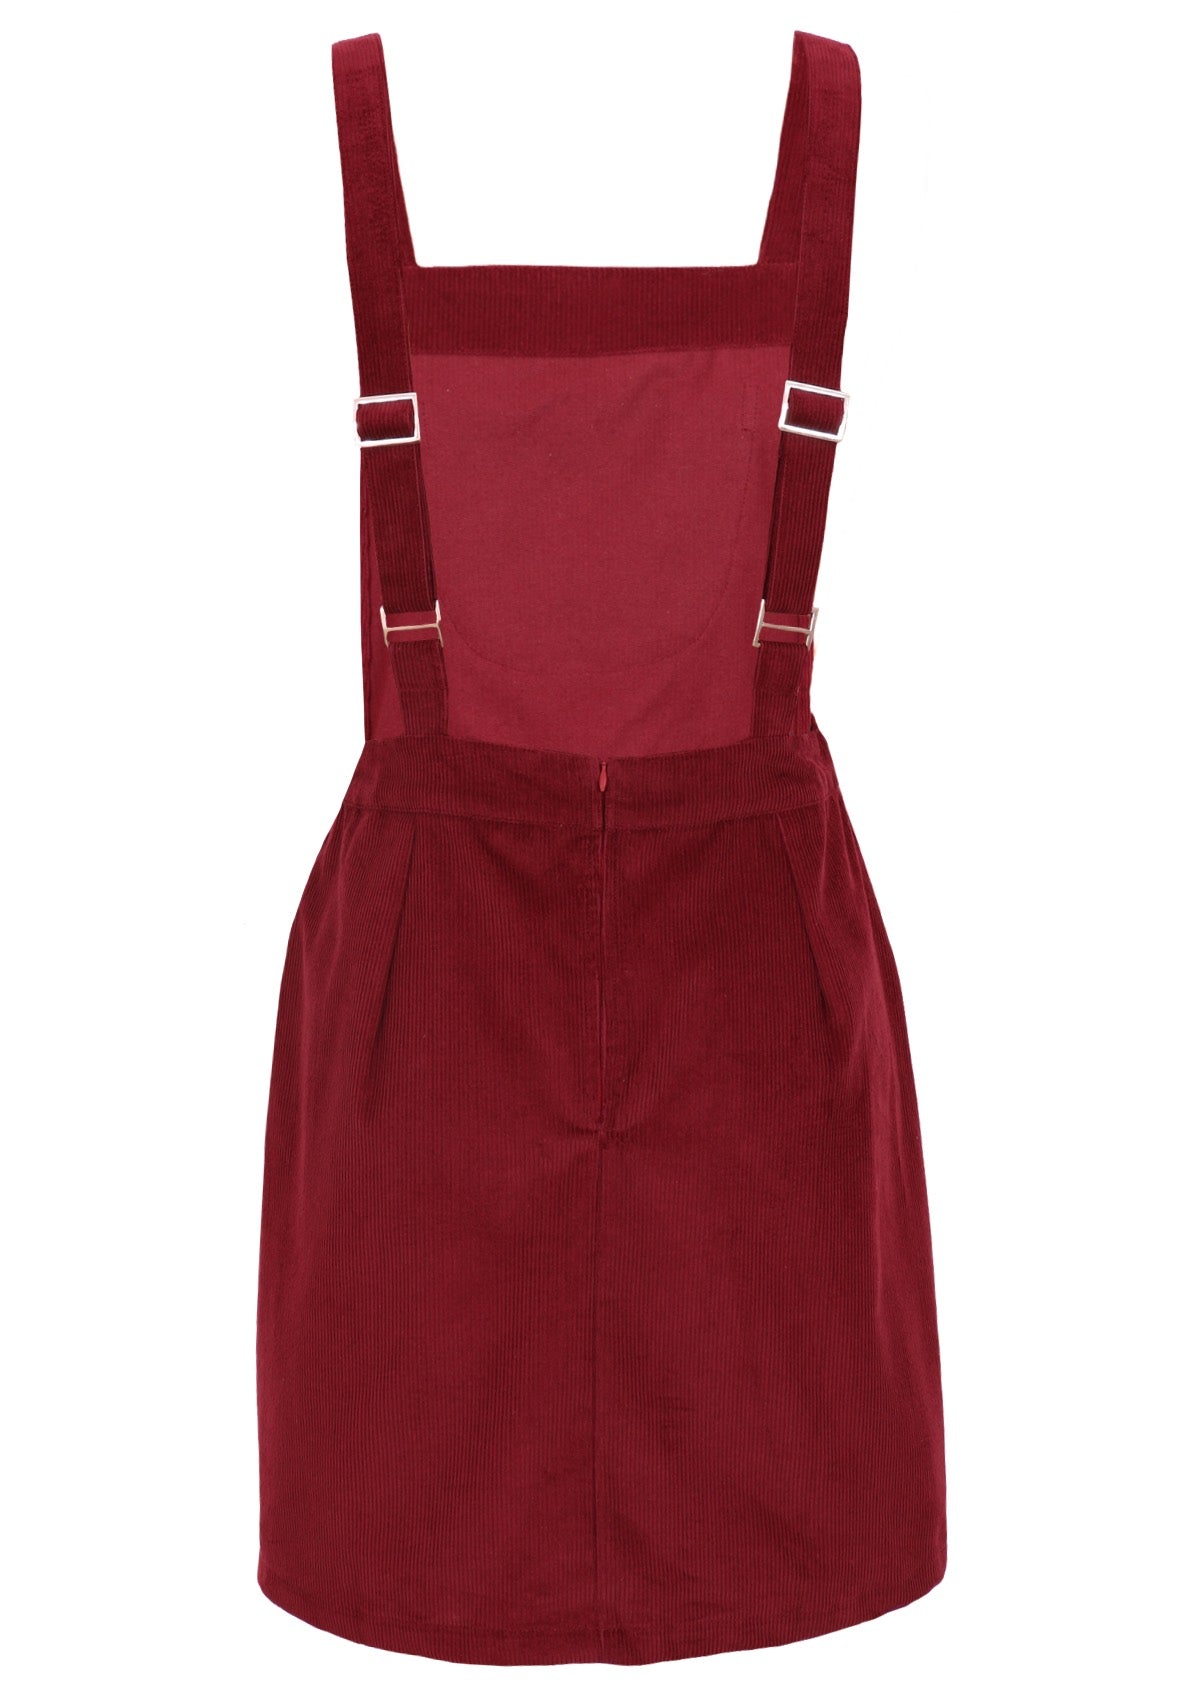 Red pinafore made from 100% cotton ends above the knee. 